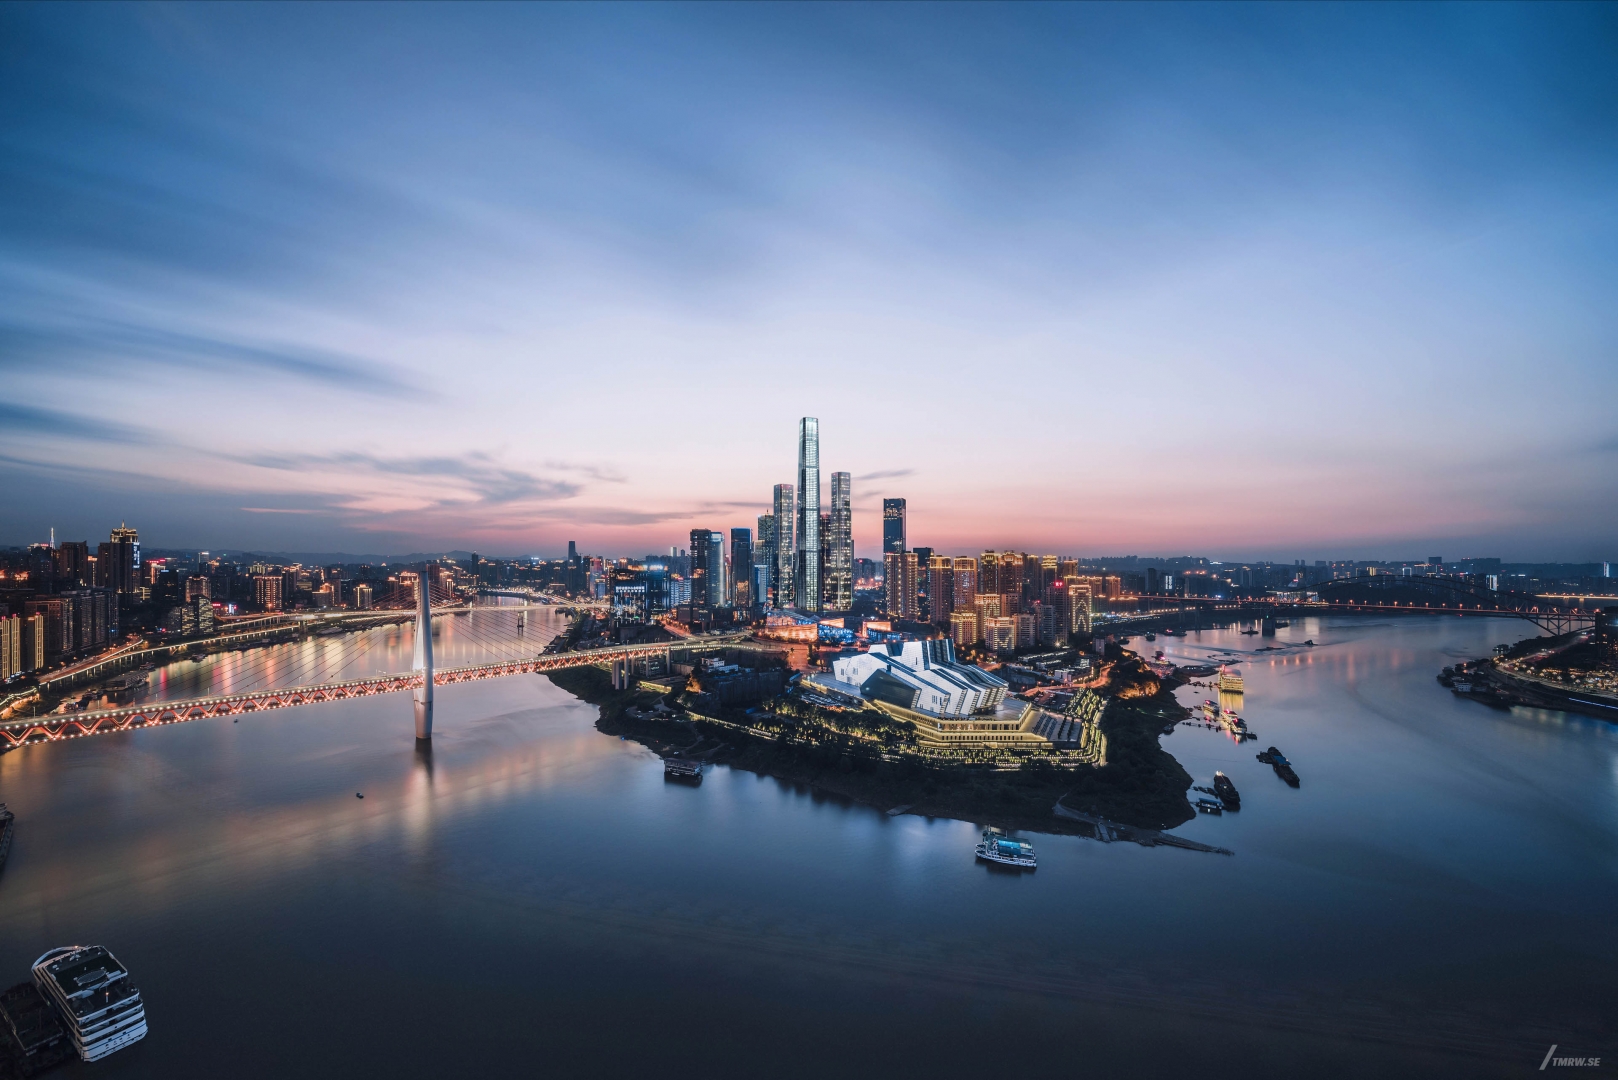 Architectural visualization of Chonqing for Tjad, a skyscraper building in evening from an areal view.